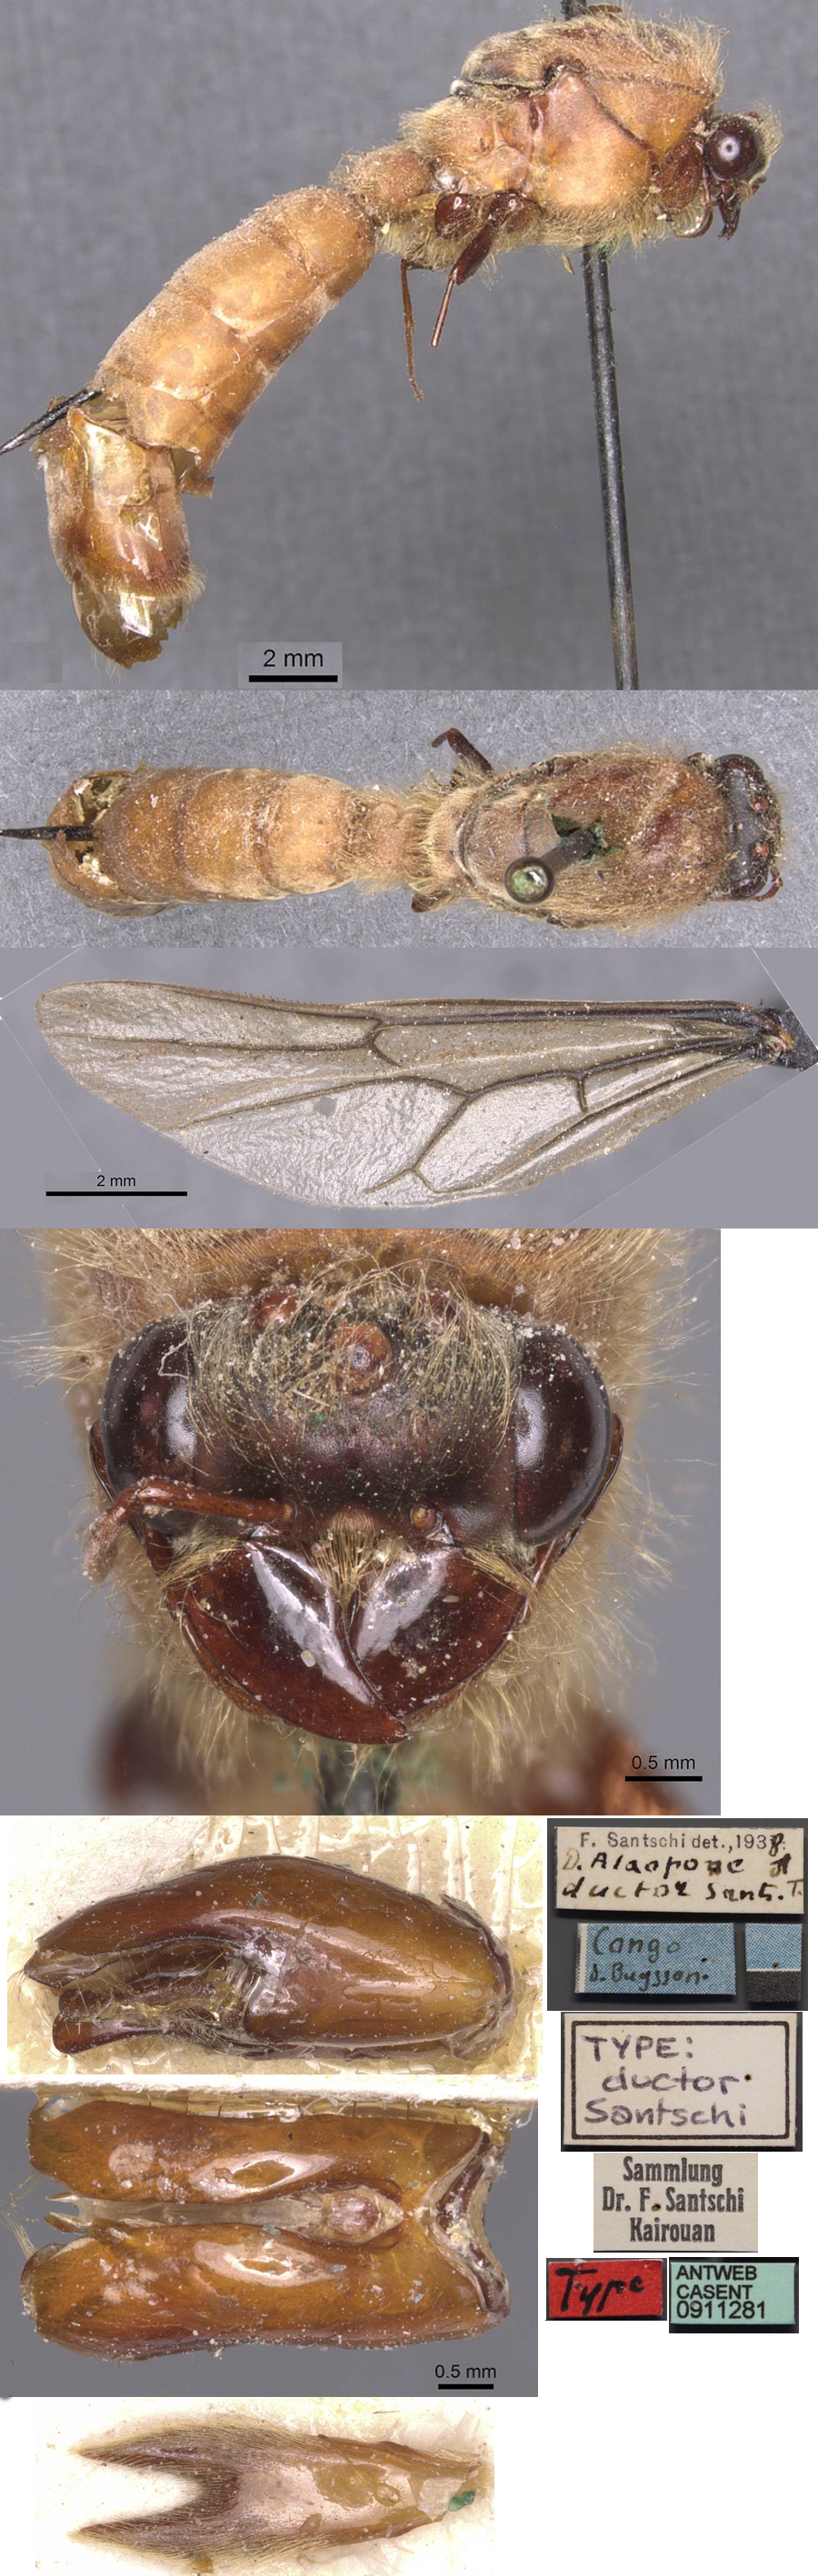 Dorylus ductor male